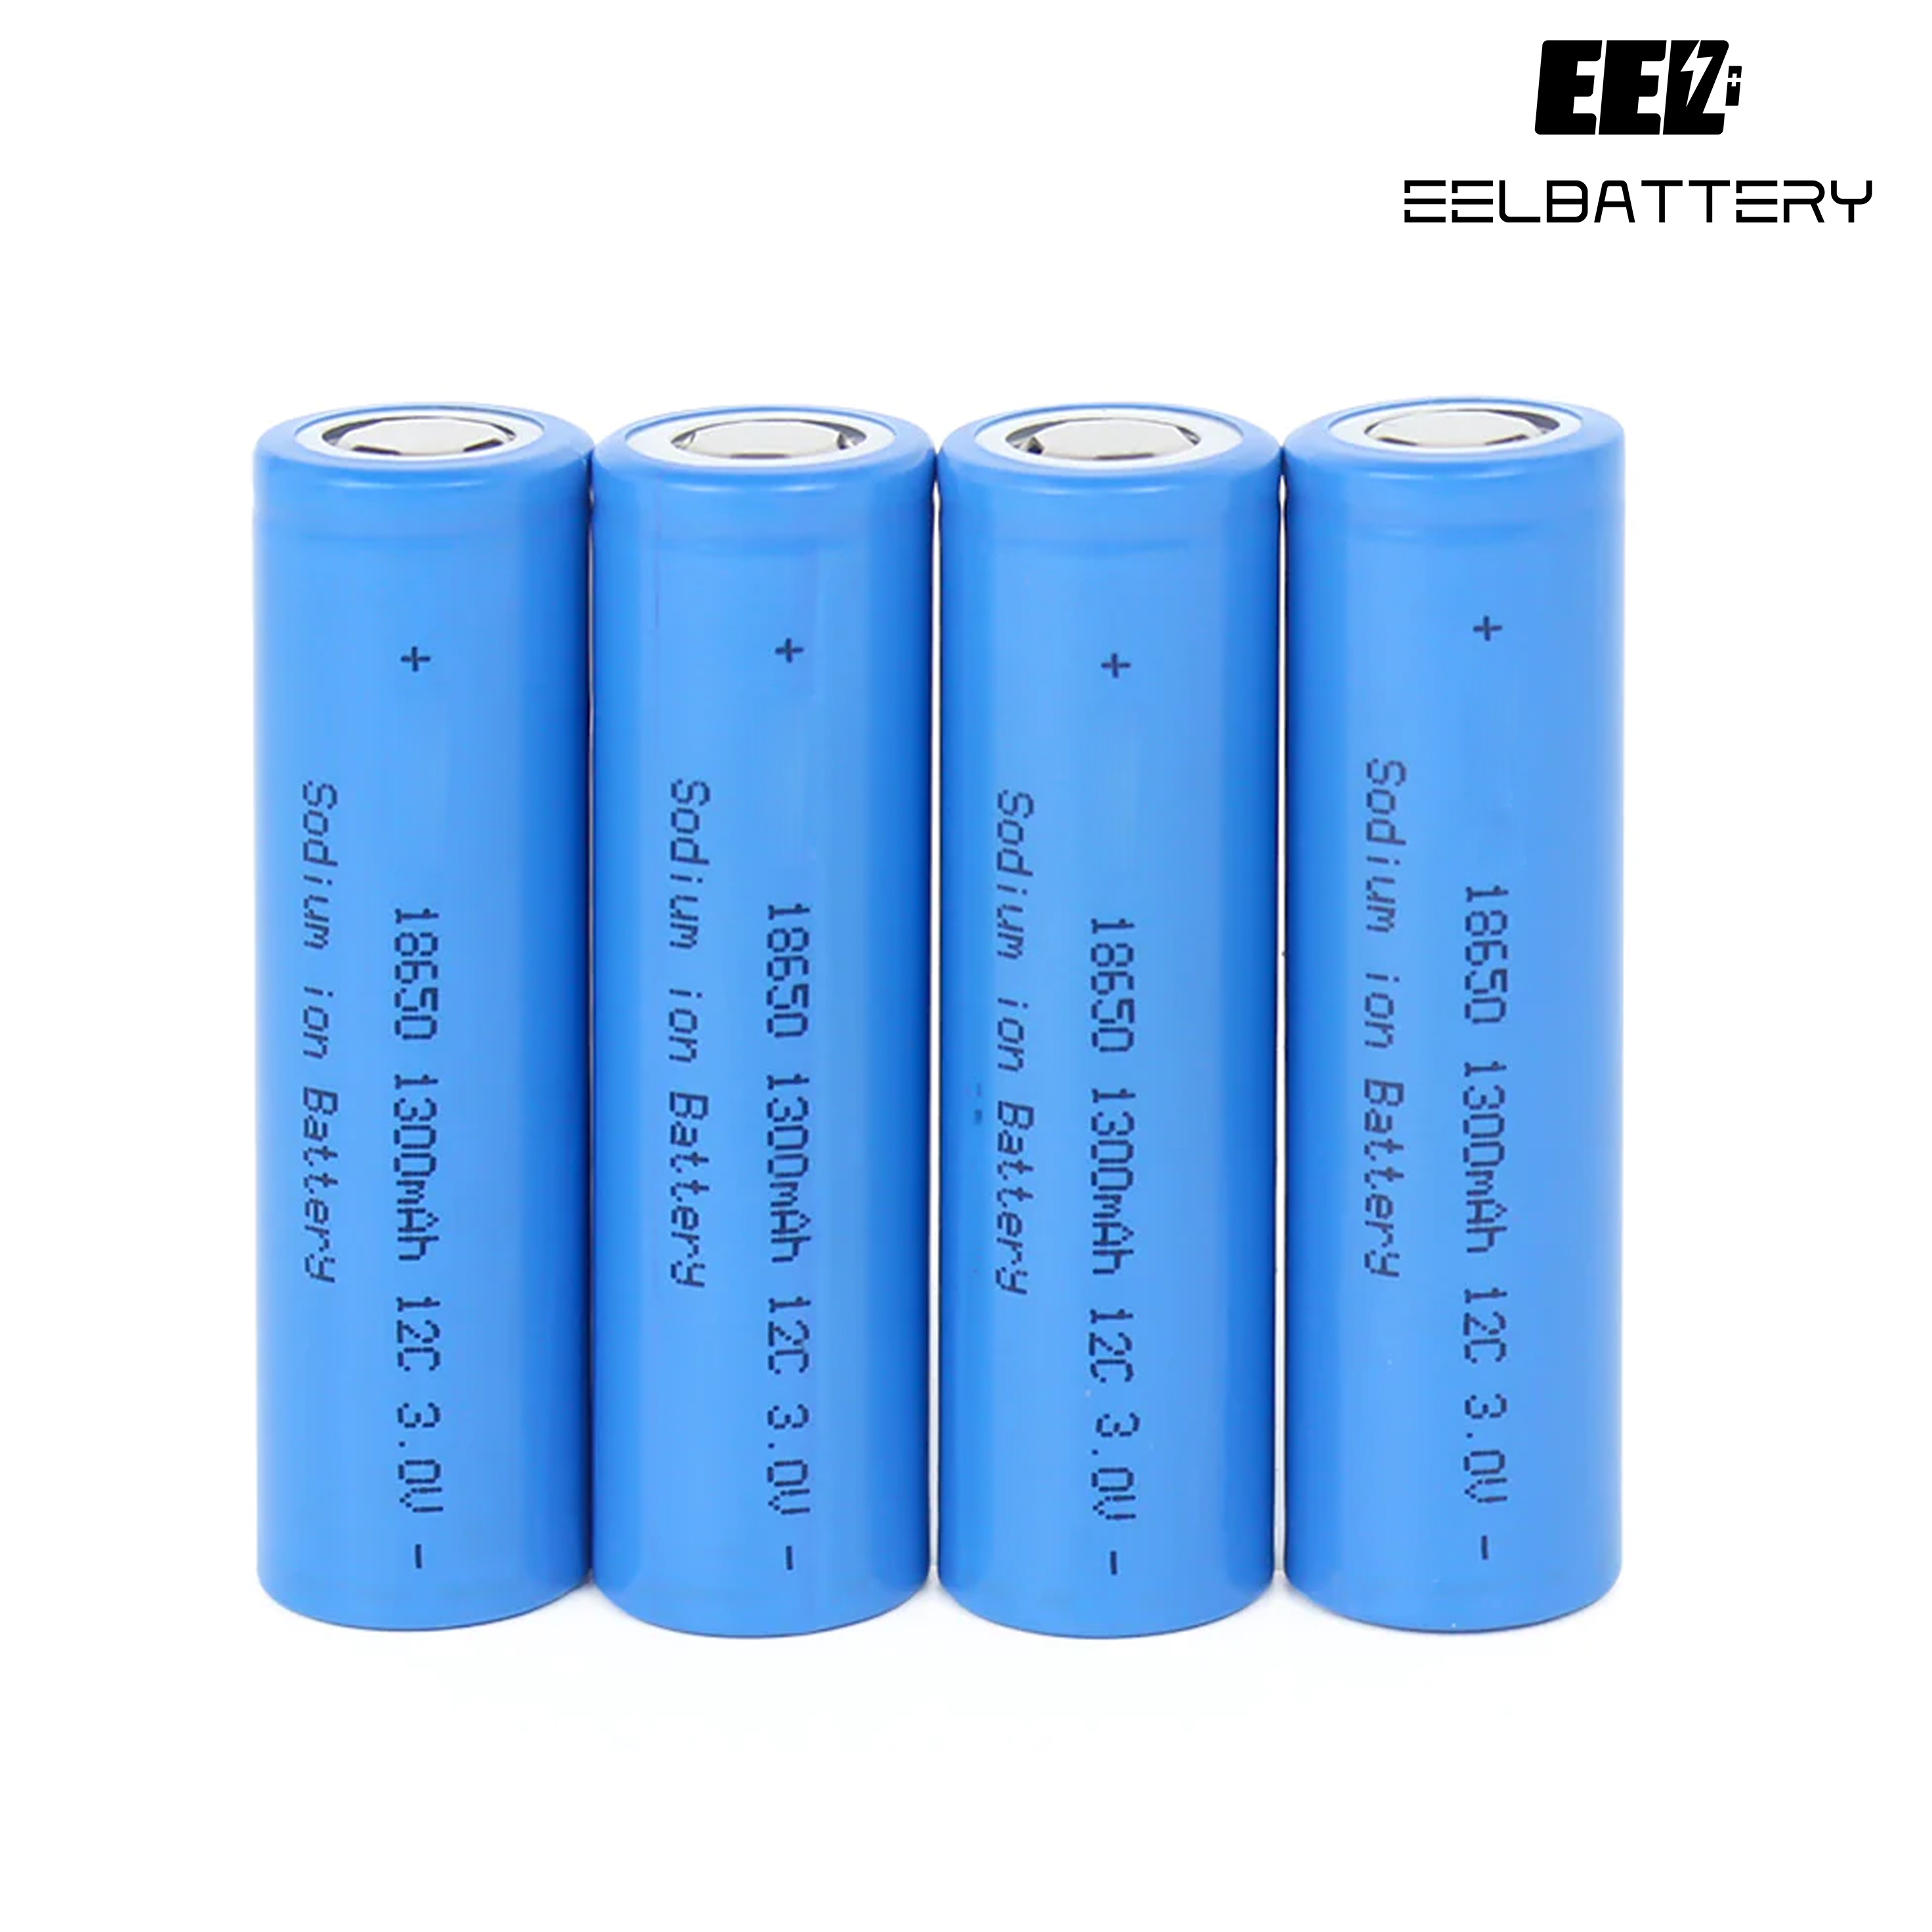 Which 18650 battery is best for an e-bike?